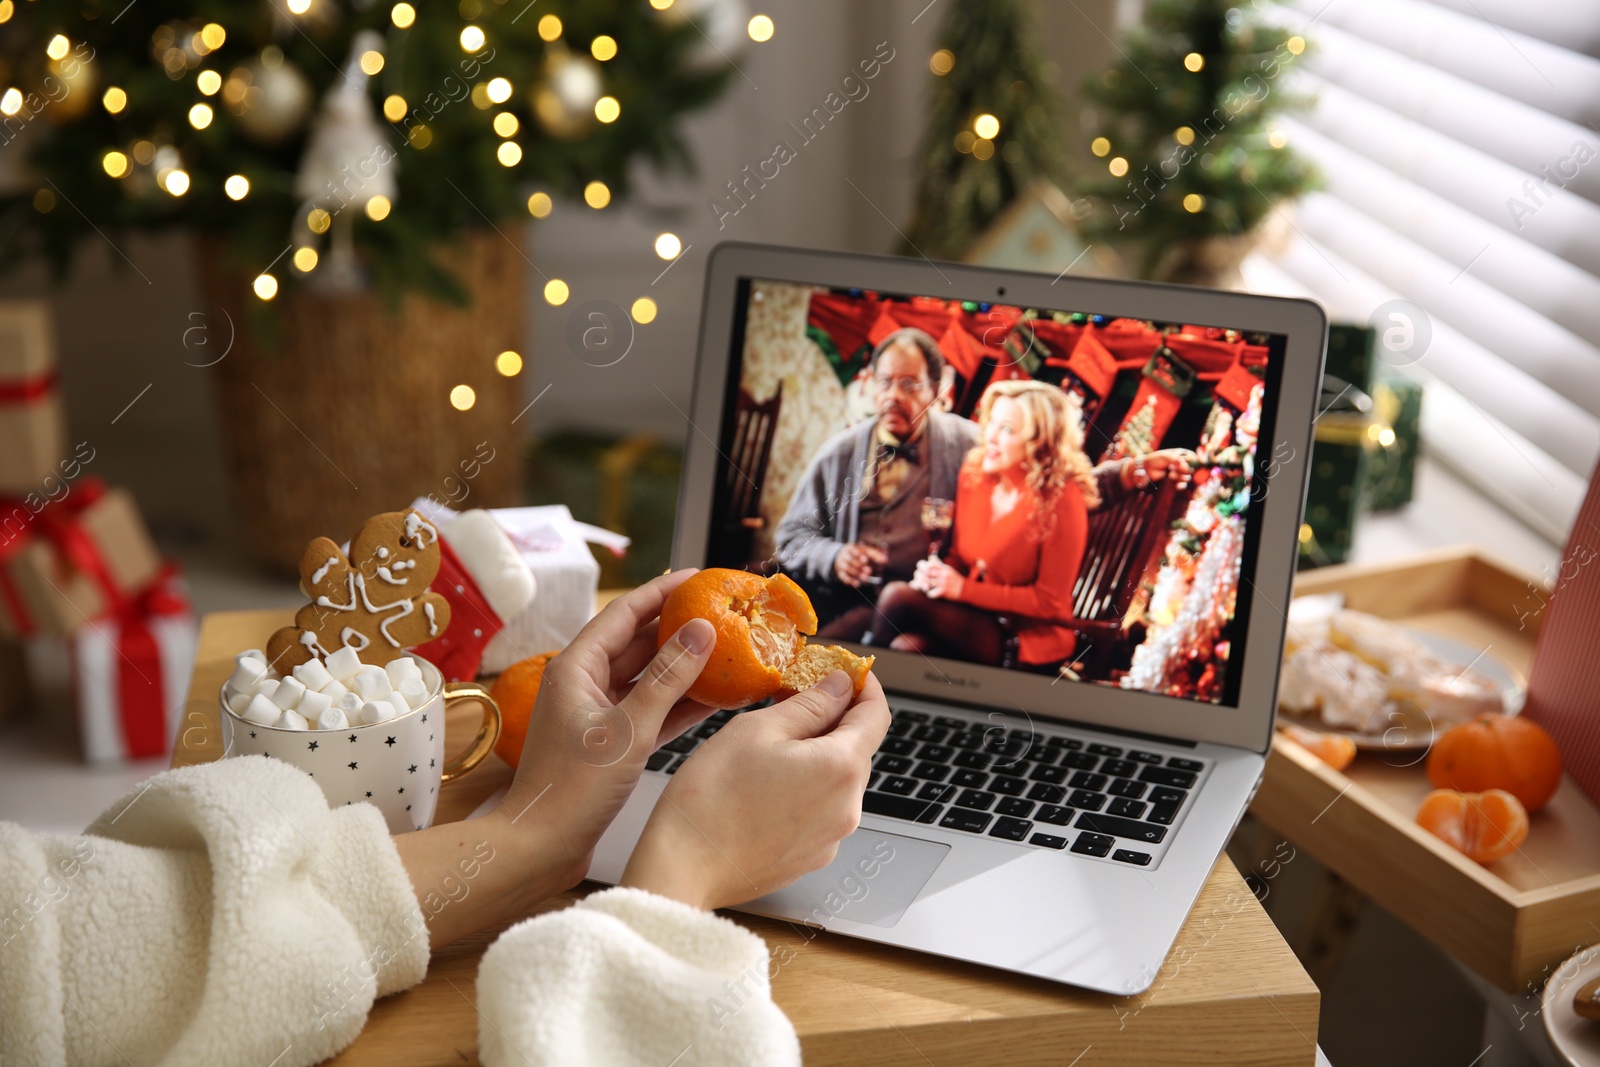 Photo of MYKOLAIV, UKRAINE - DECEMBER 25, 2020: Woman with tangerine watching Surviving Christmas movie on laptop at home, closeup. Cozy winter holidays atmosphere